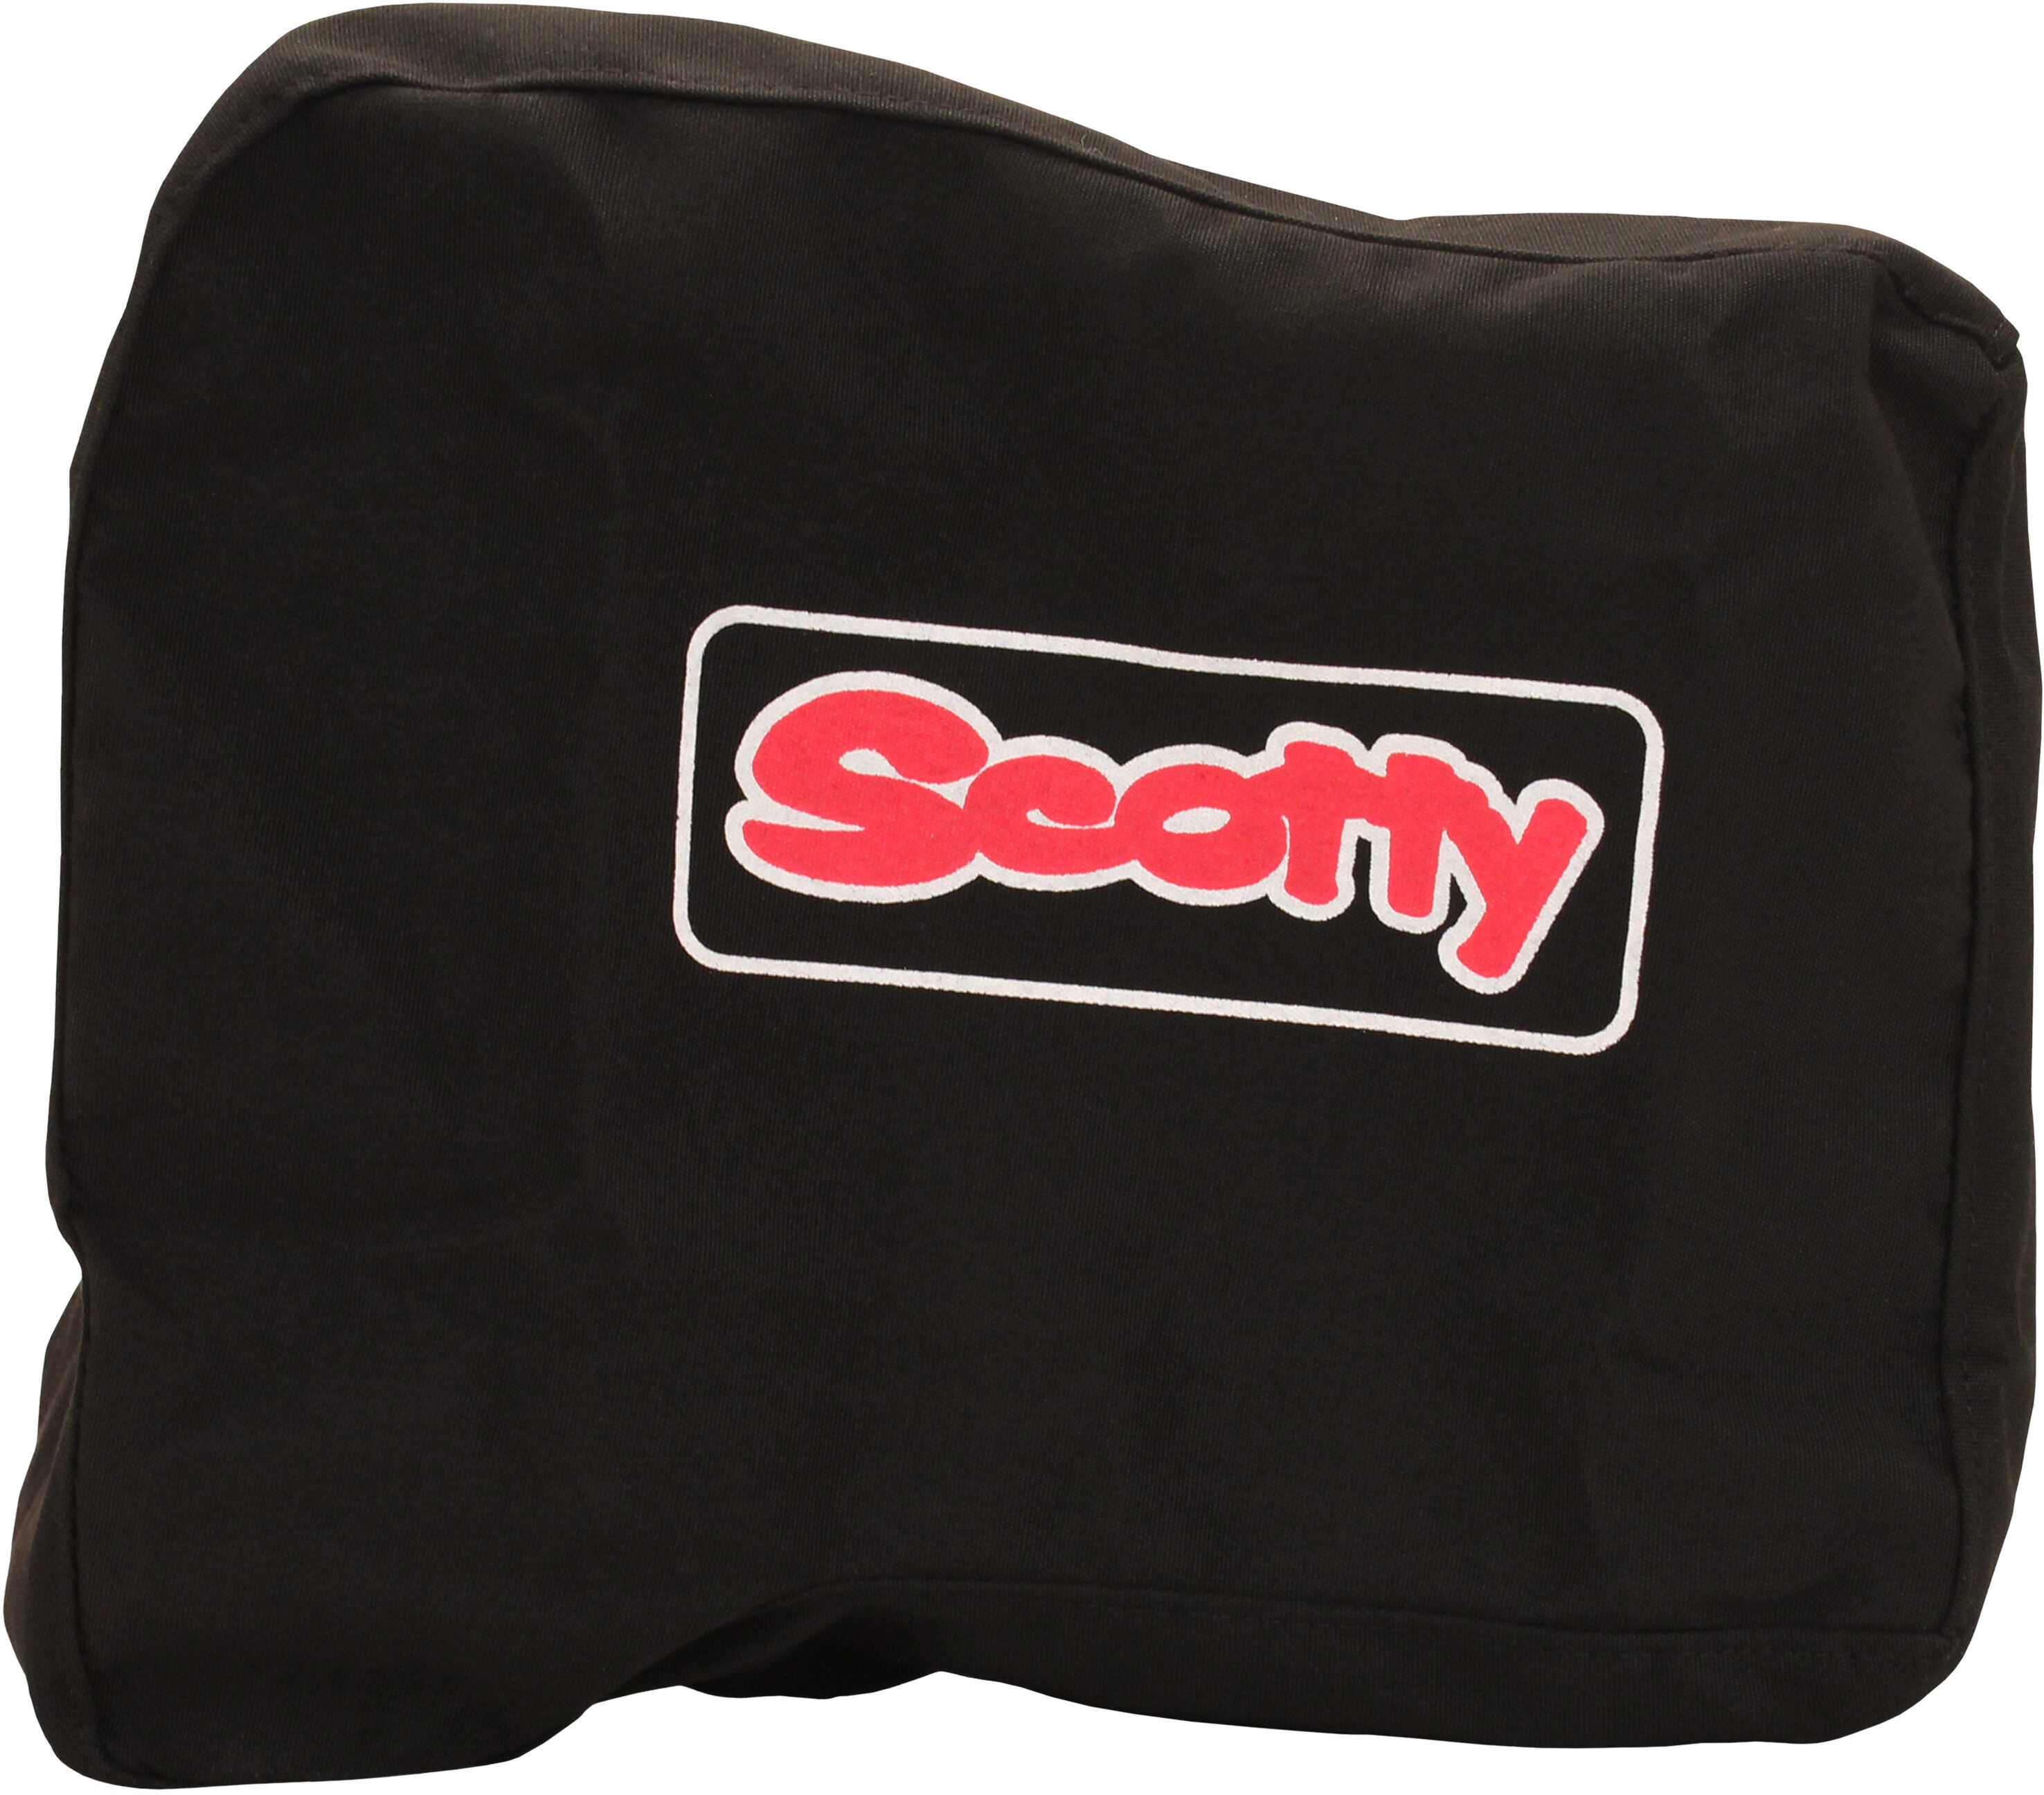 Scotty Electric Downrigger Cover